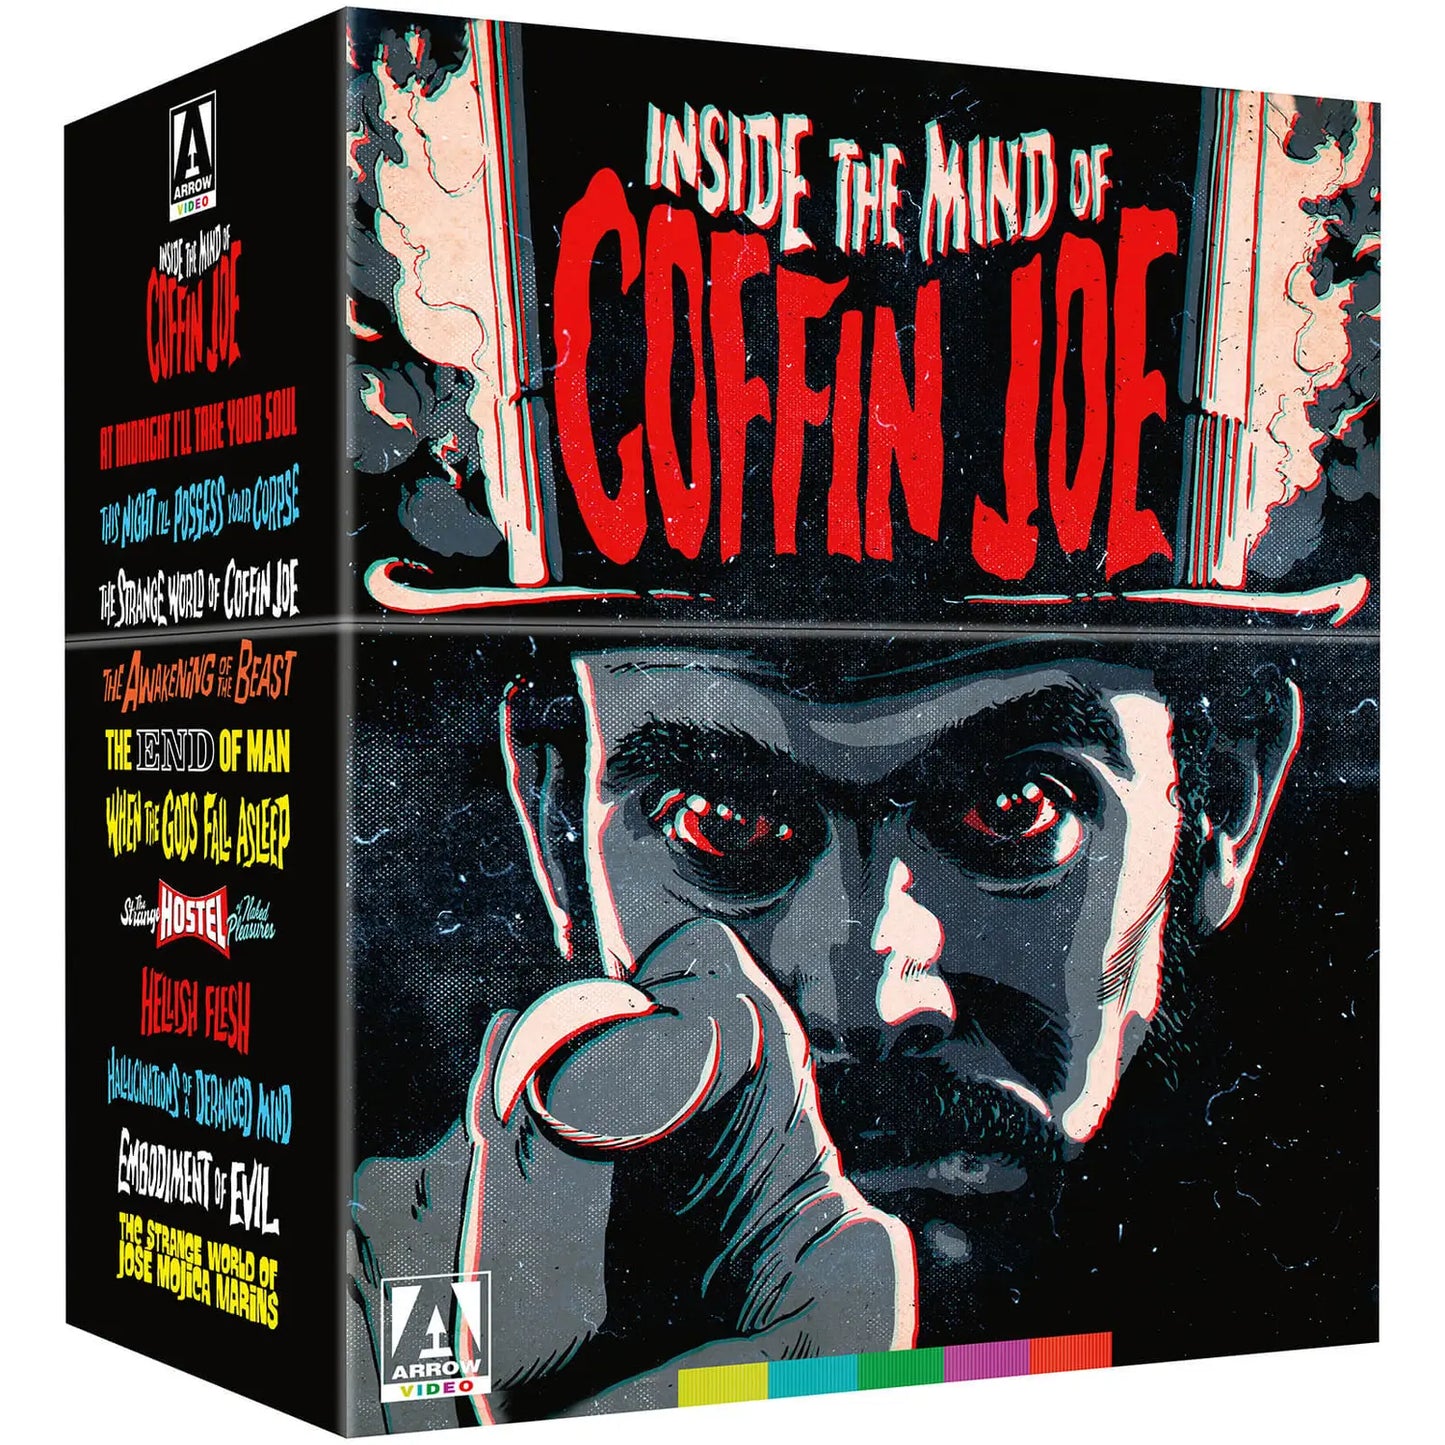 Inside The Mind Of Coffin Joe Limited Edition Arrow Video Blu-Ray Box Set [PRE-ORDER]